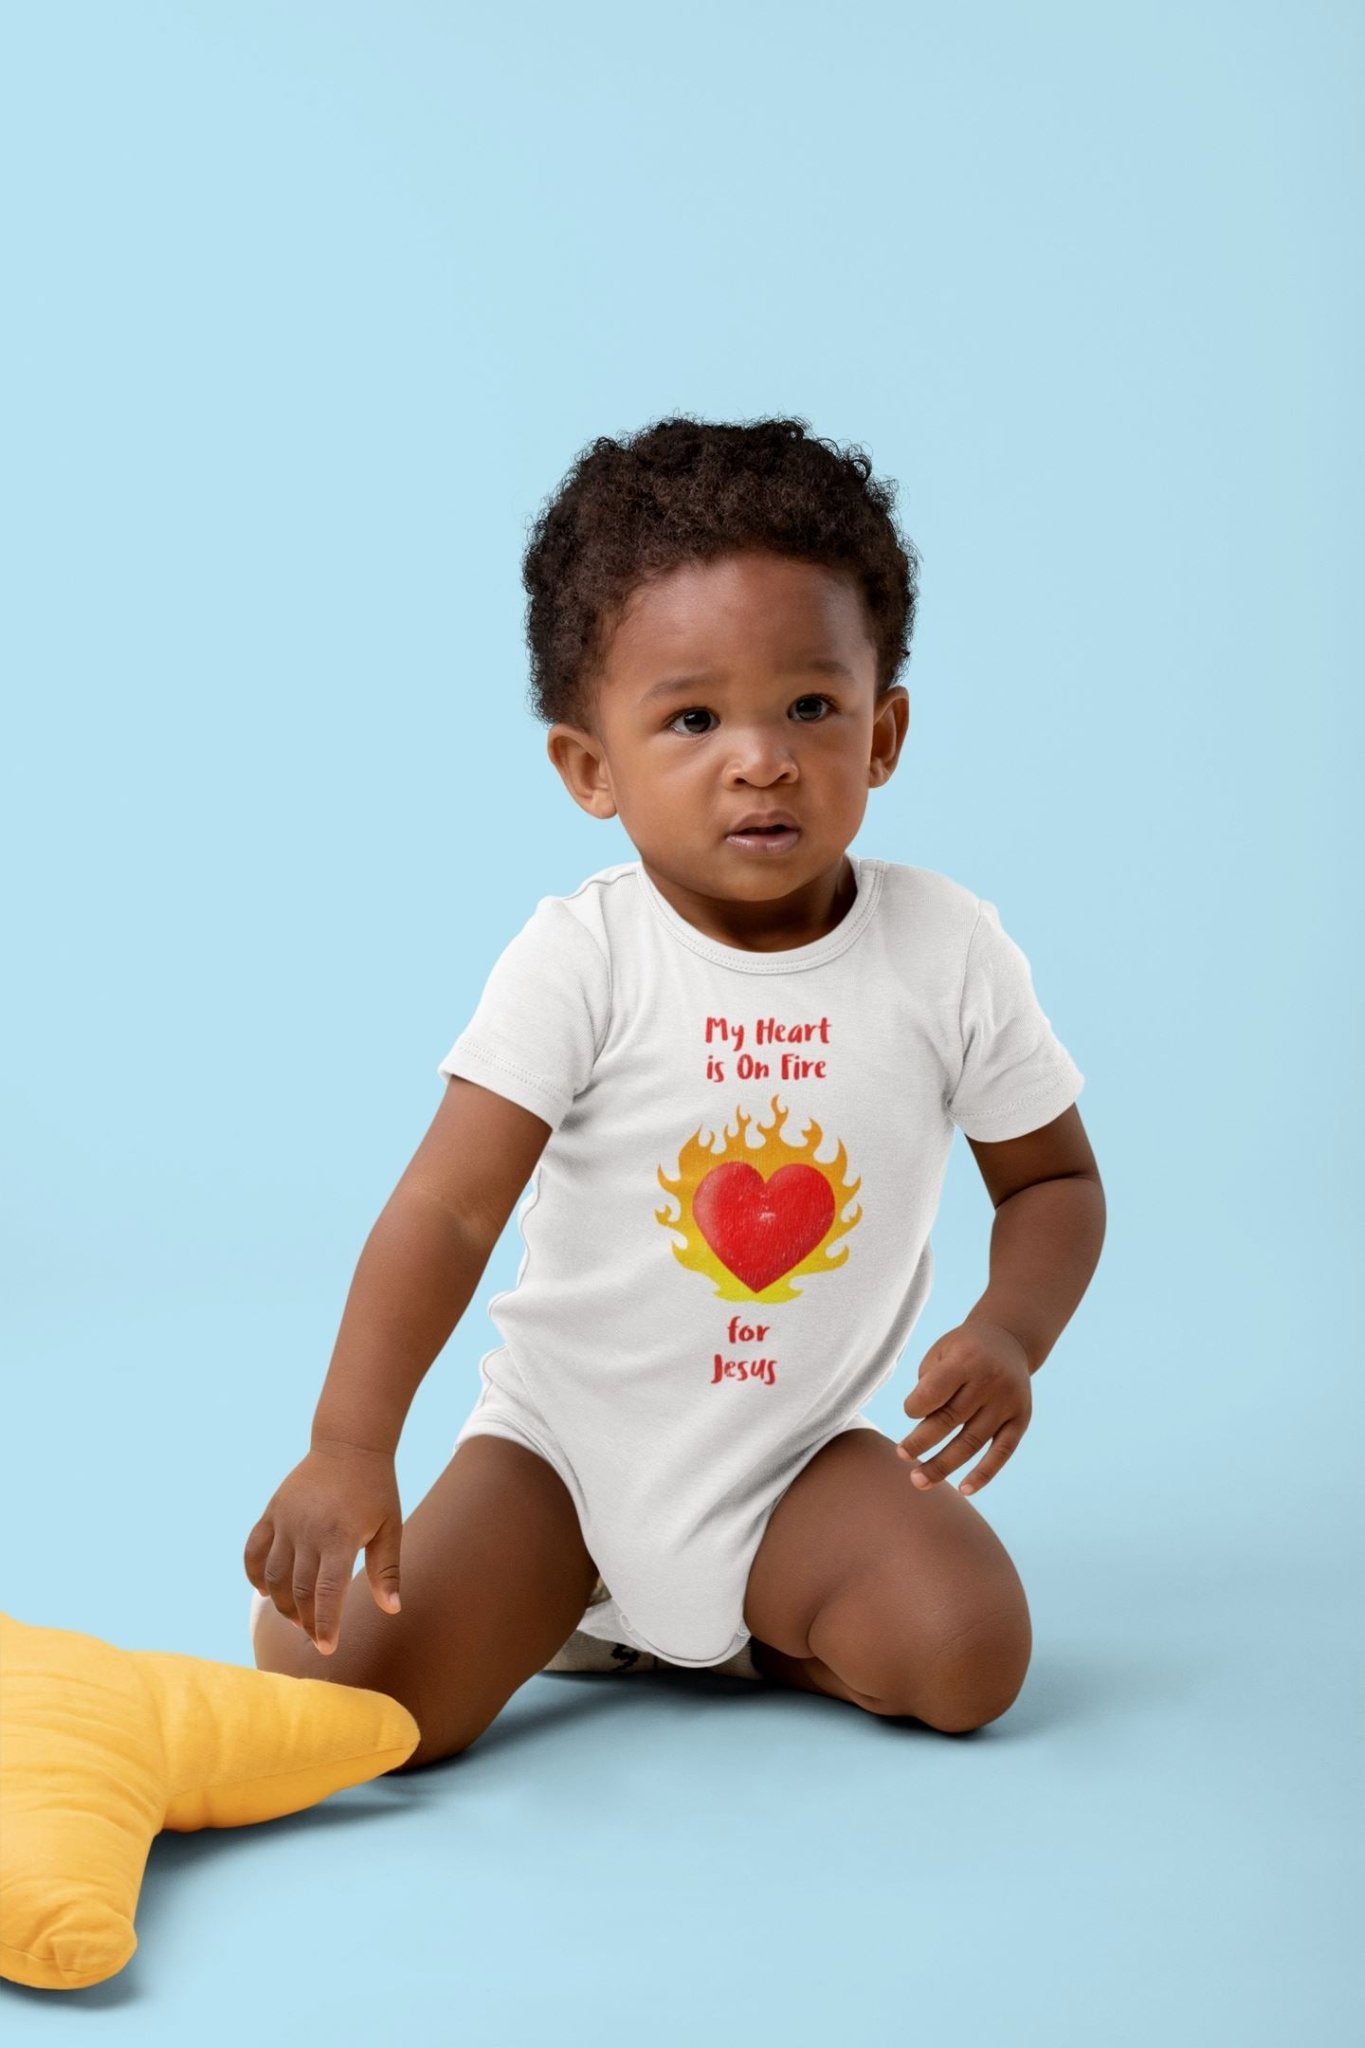 Heart On Fire - Baby’s Romper - Trini-T Ministries